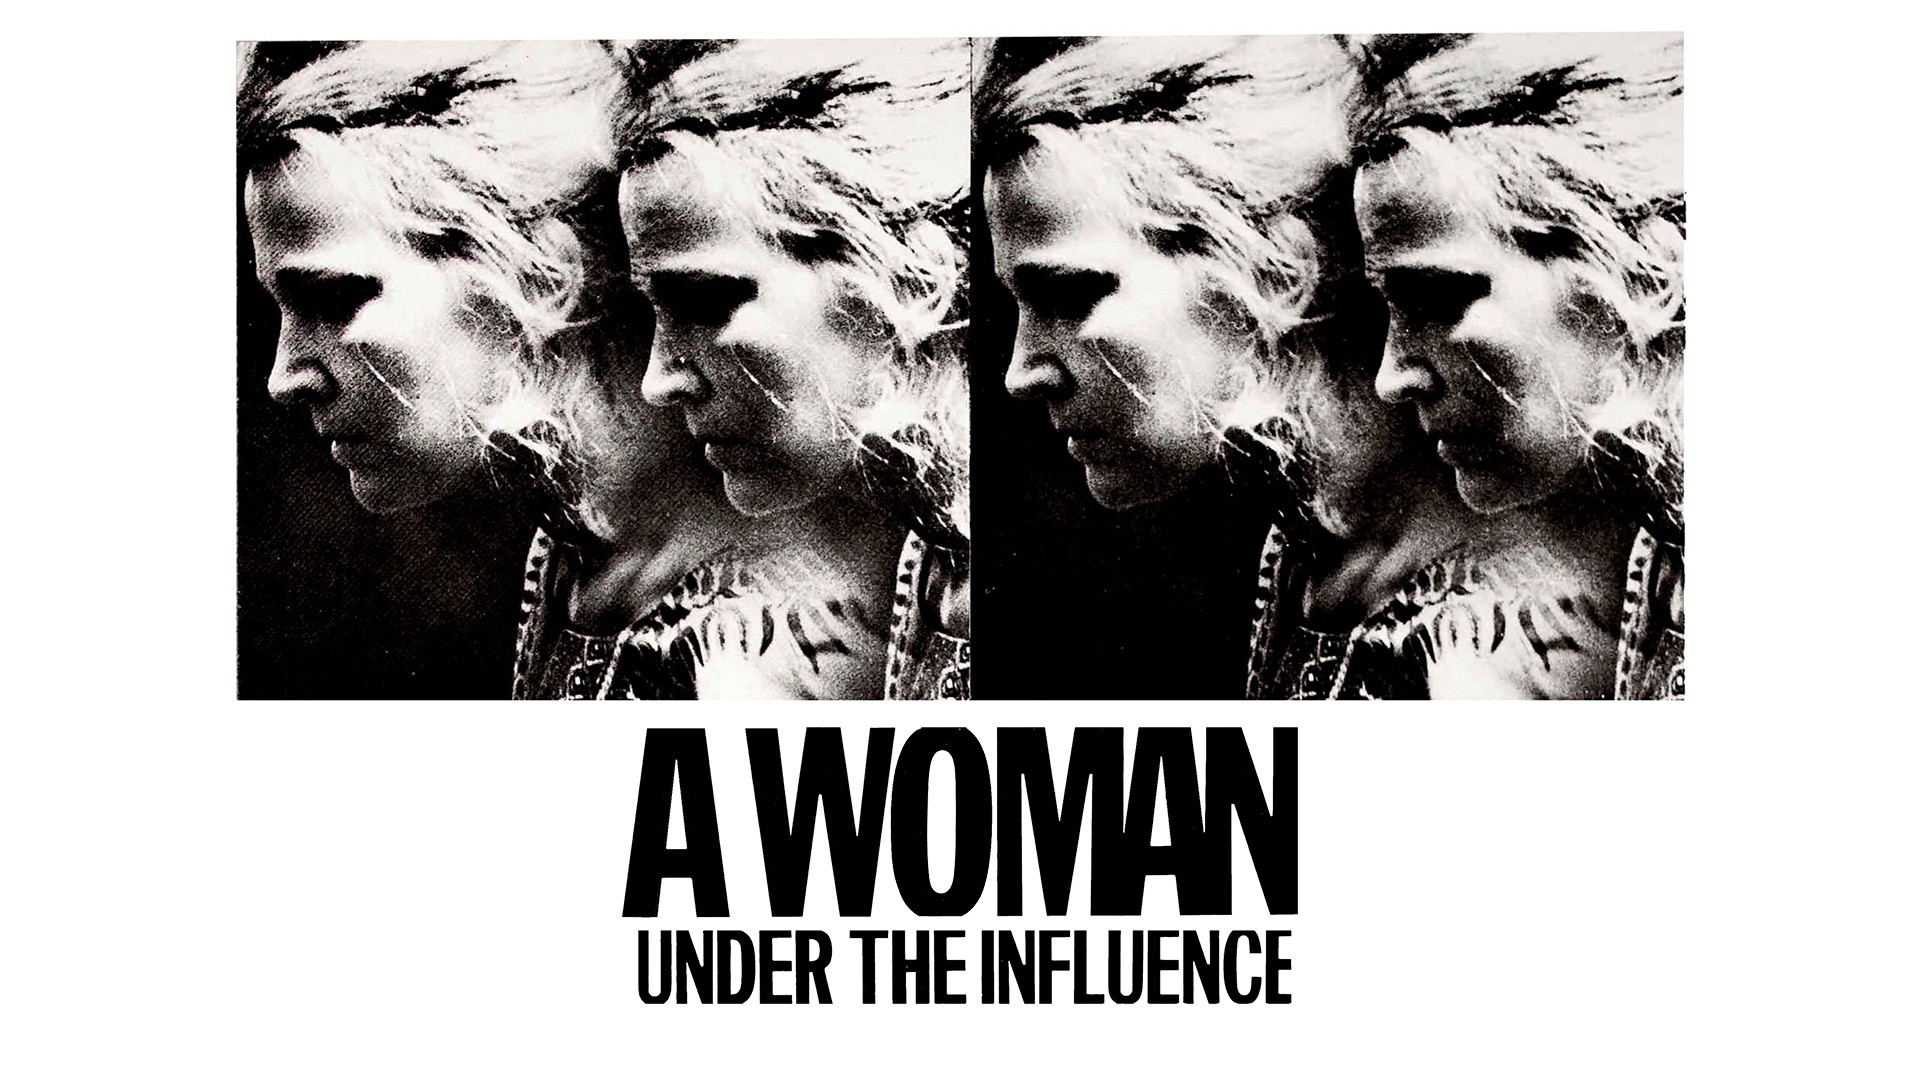 A WOMAN UNDER THE INFLUENCE (1976 review)